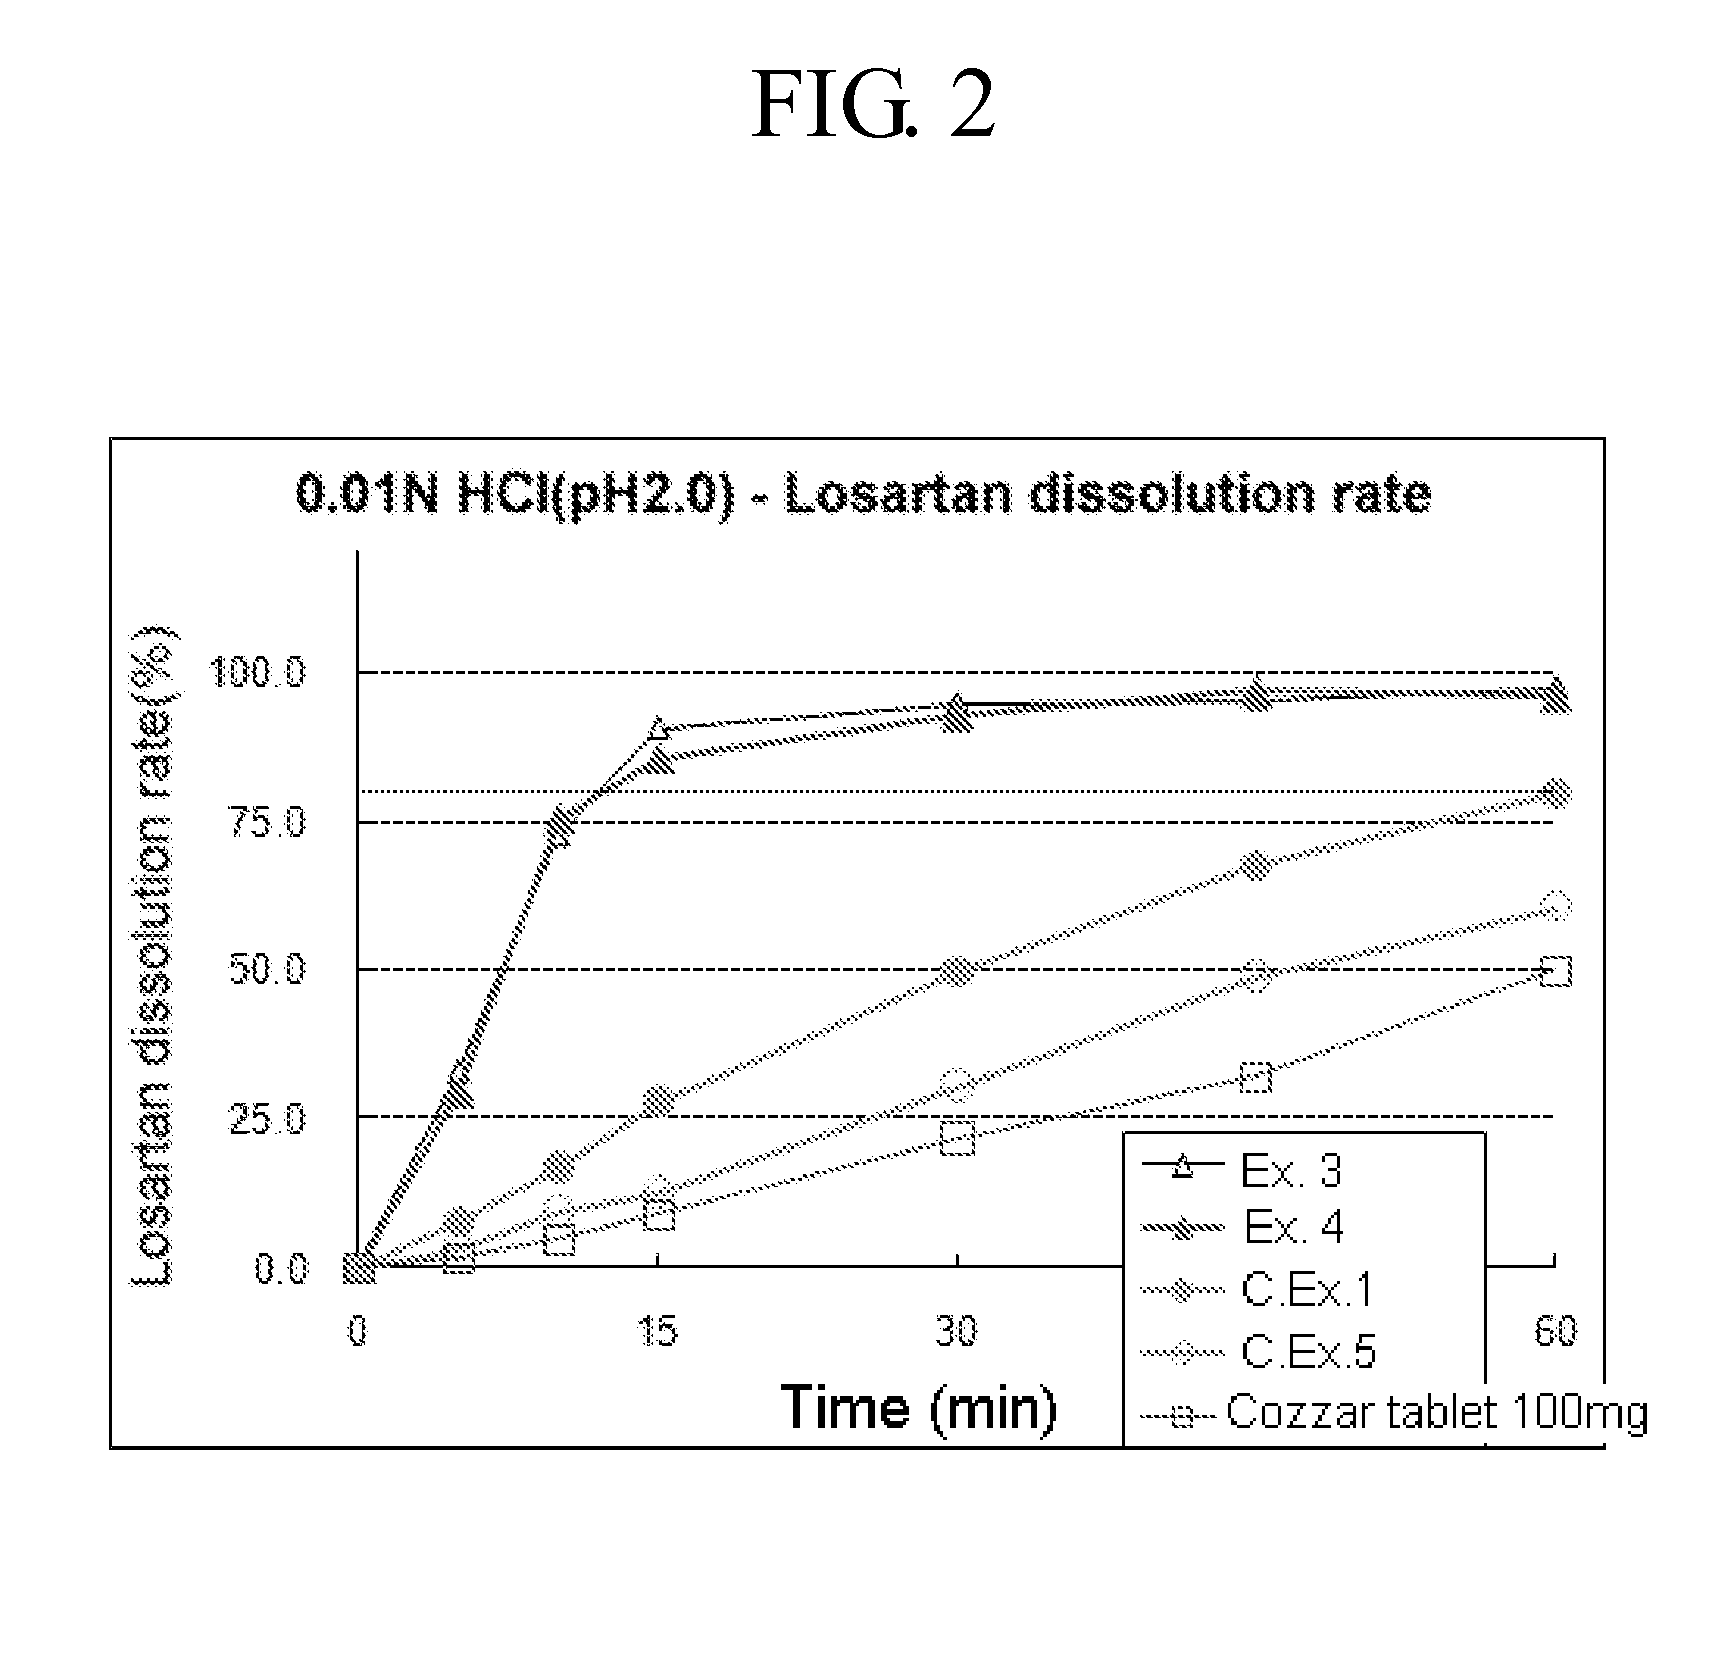 Solid pharmaceutical composition comprising amlodipine and losartan